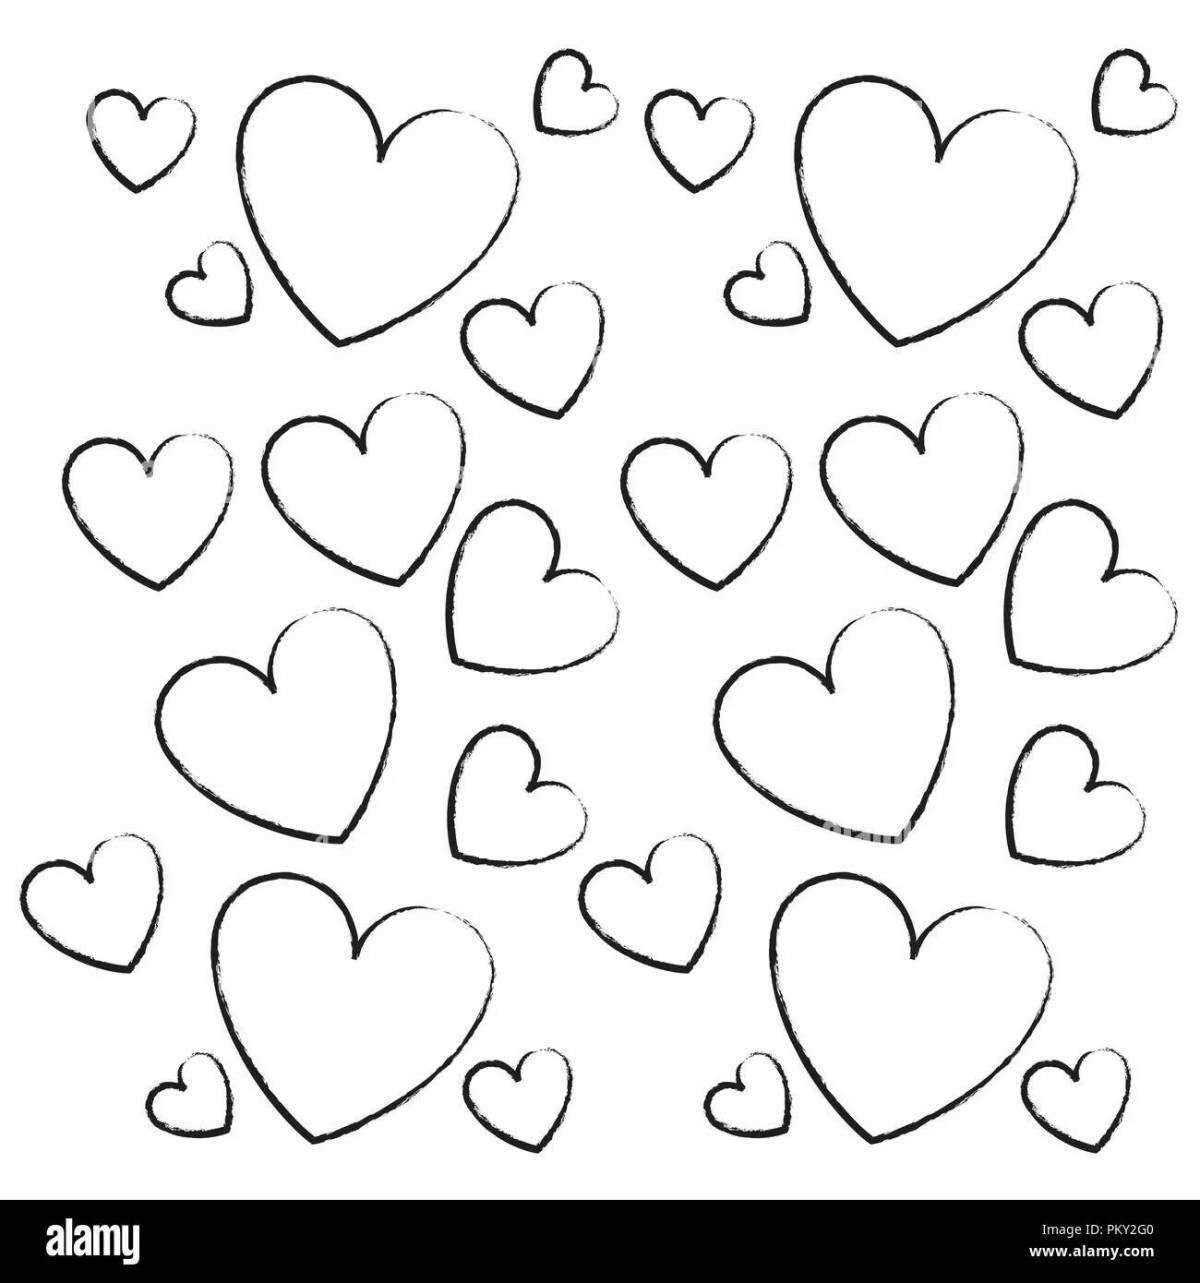 Adorable little heart coloring page